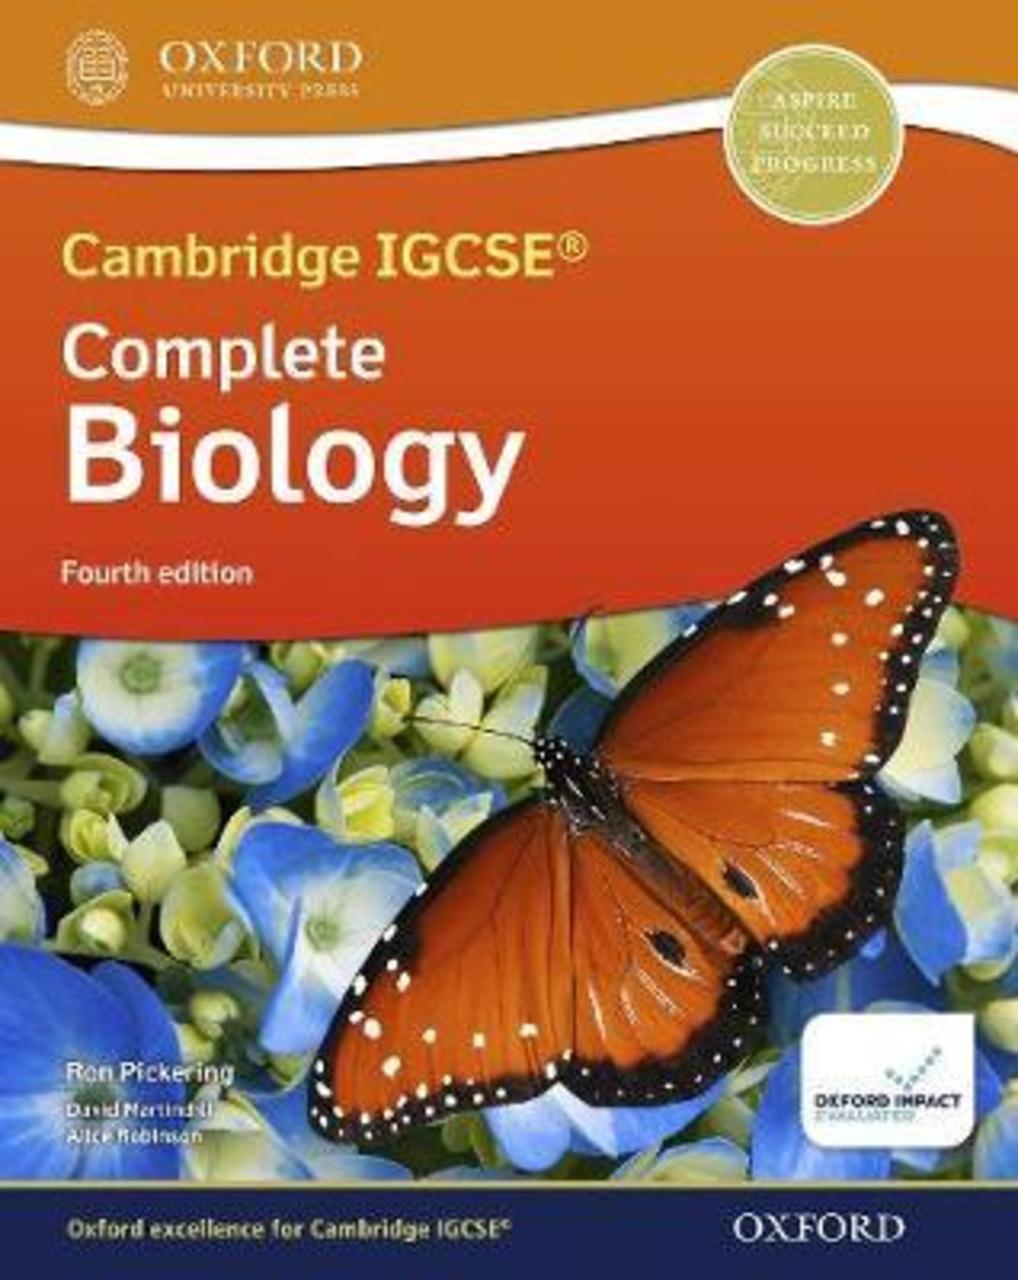 Sách - Cambridge IGCSE (R) & O Level Complete Biology: Student Book Fourth Edit by Ron Pickering (UK edition, paperback)